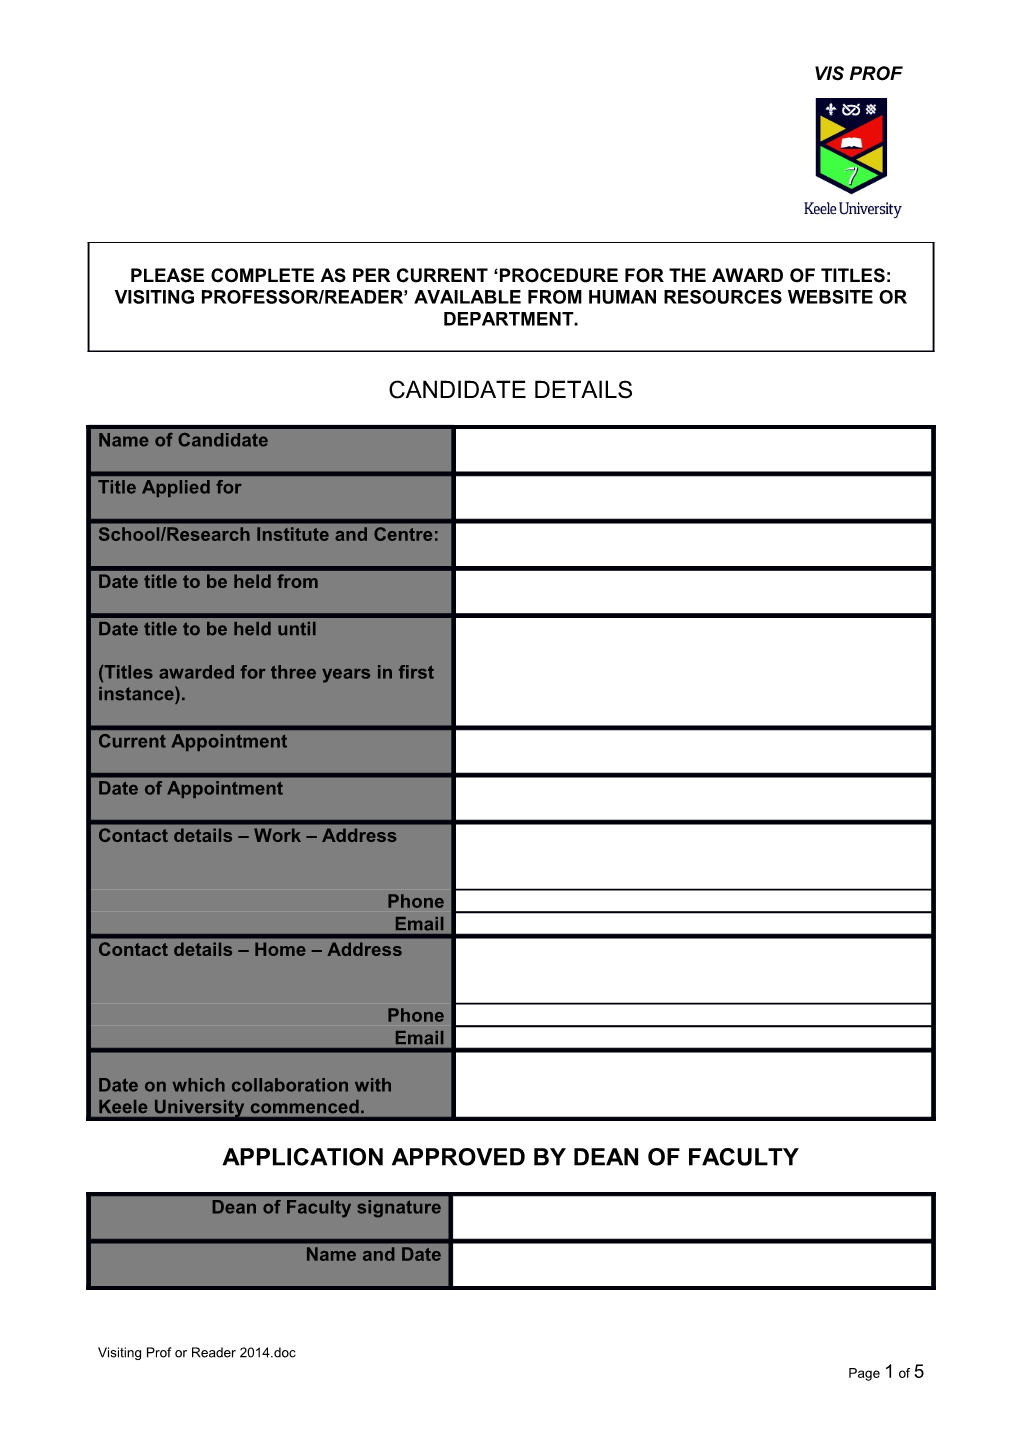 Application Approved by Dean of Faculty